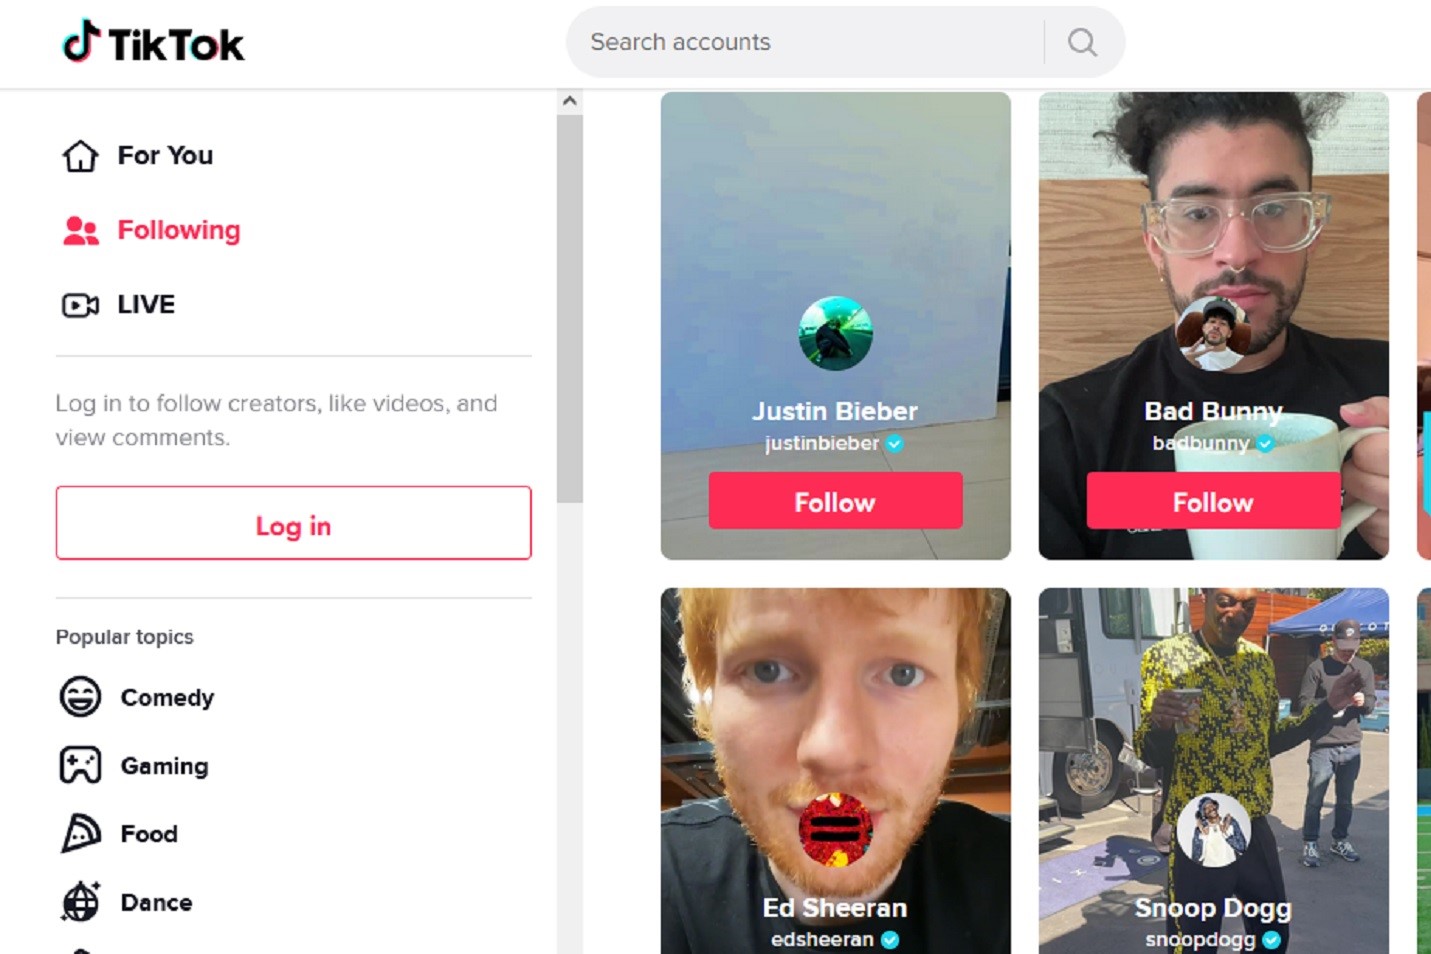 How to tell if an account is verified on TikTok